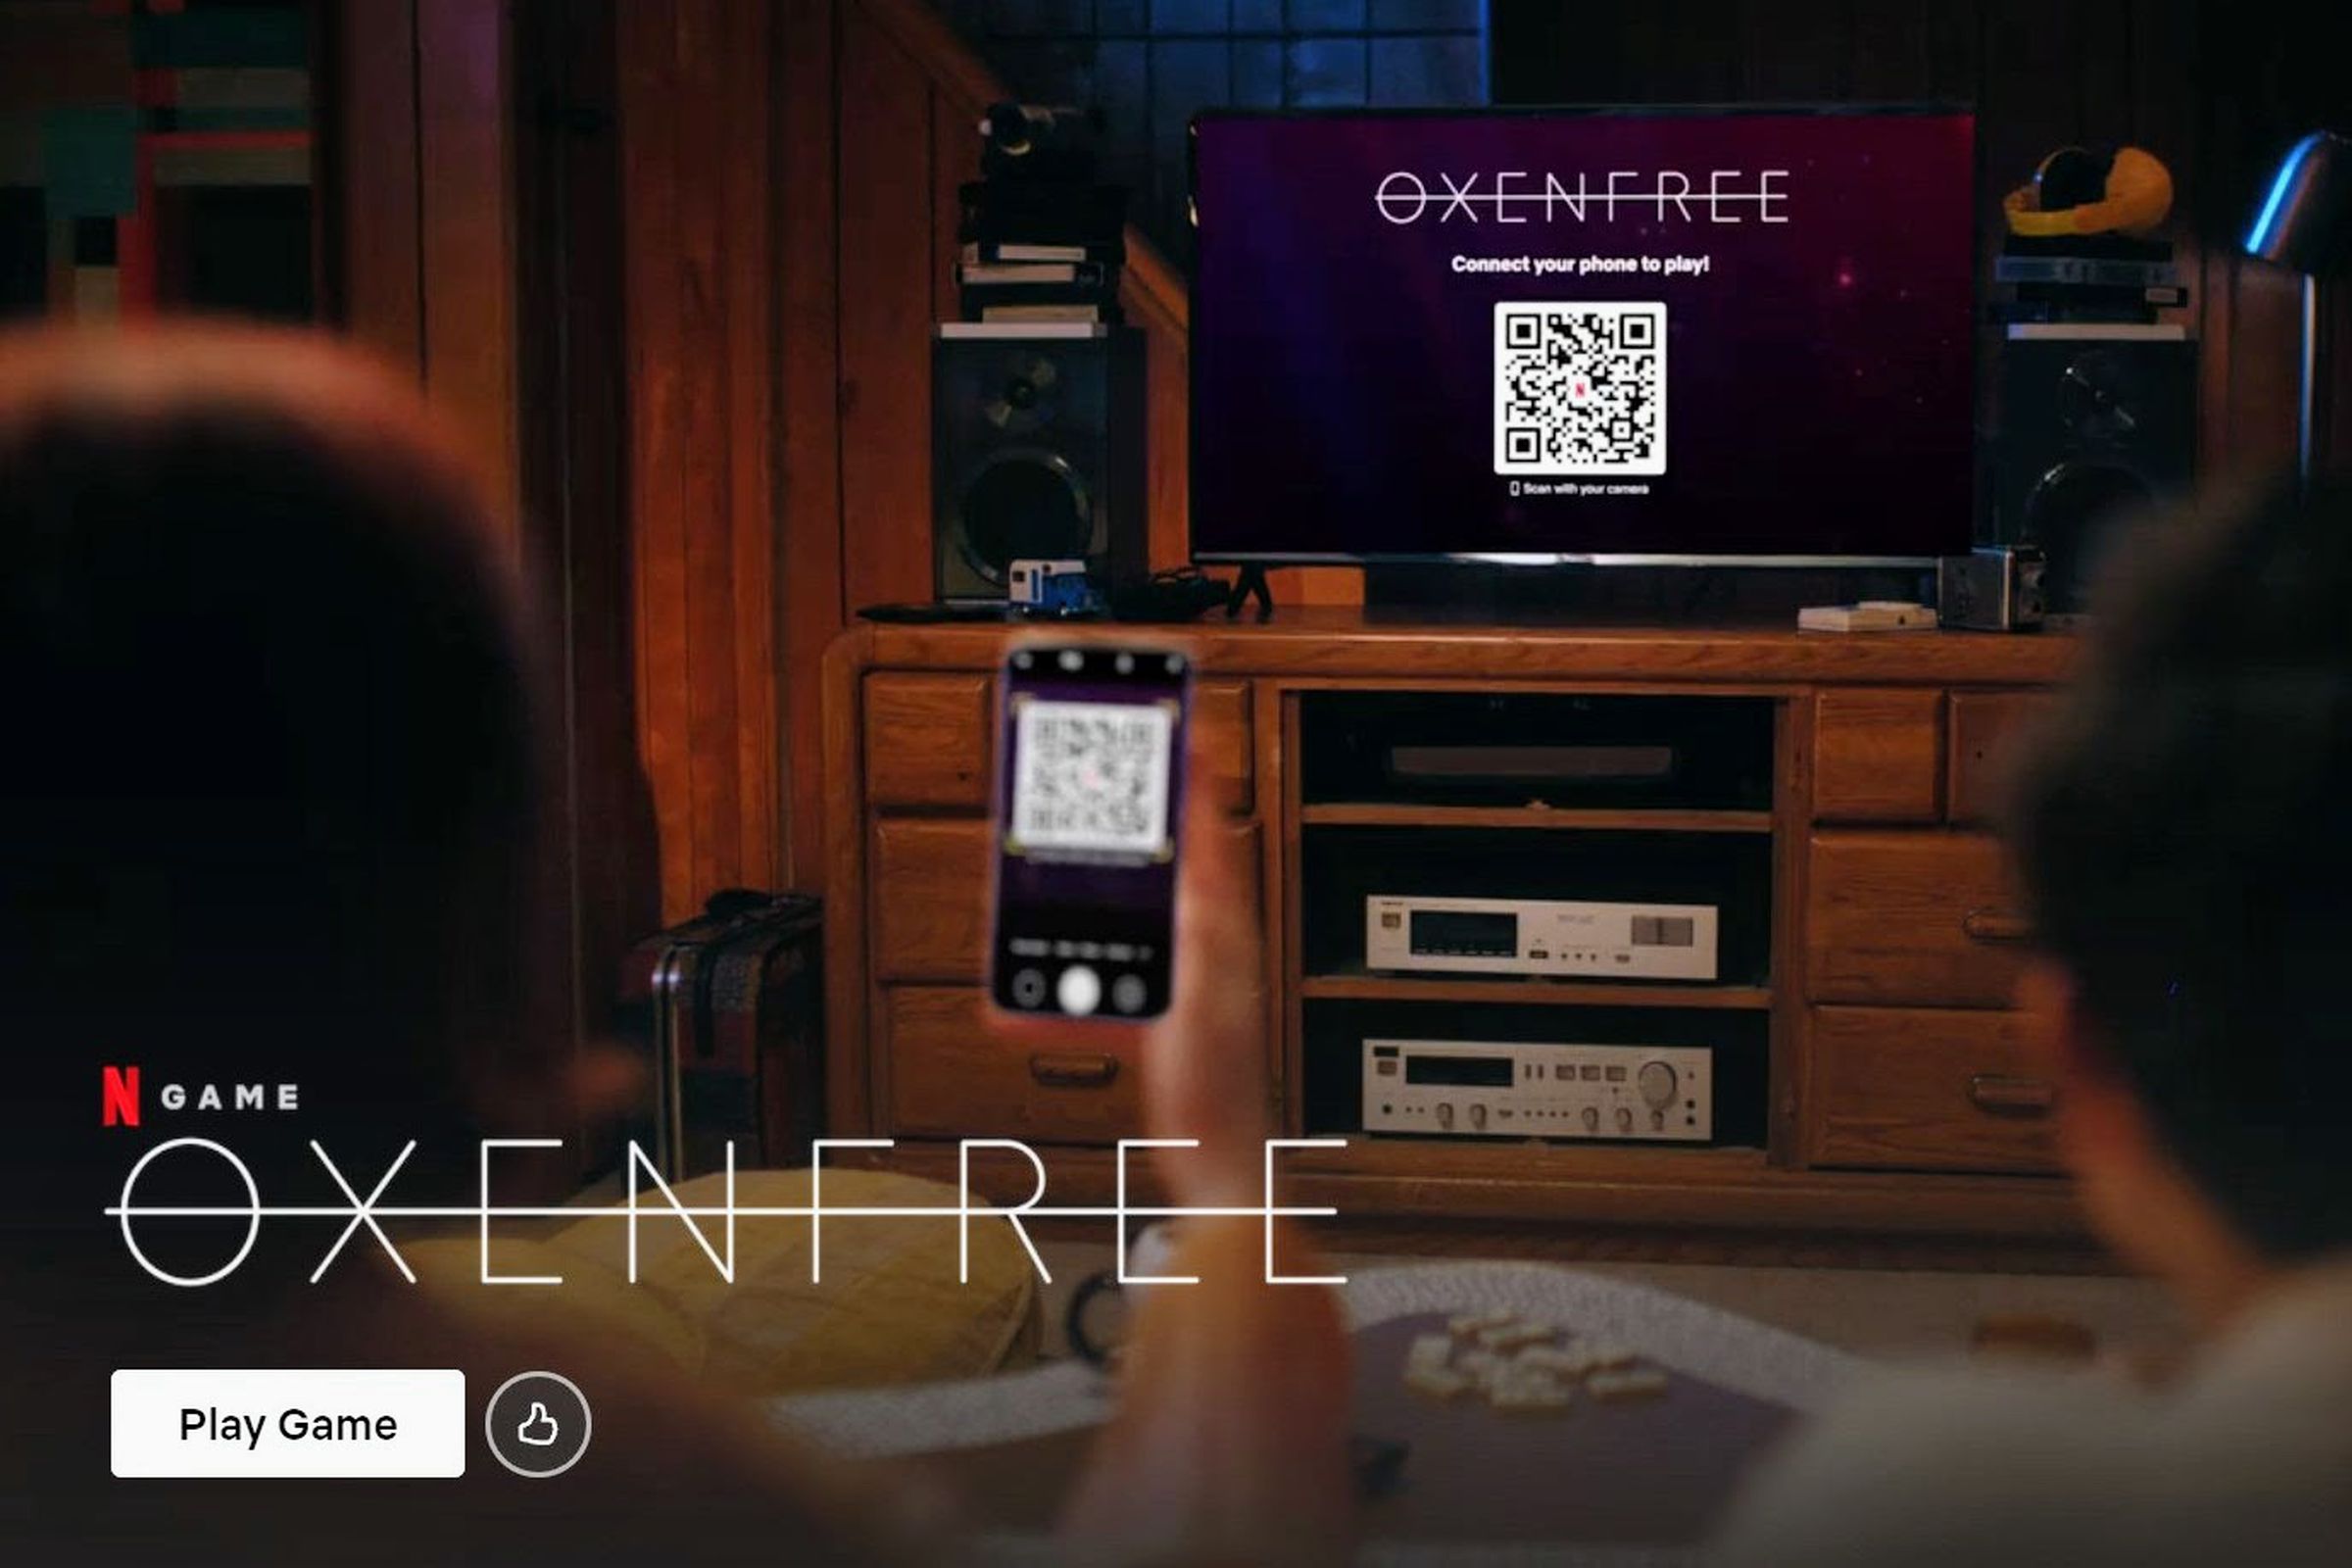 Netflix’s website shows a trailer for Oxenfree, where people hold up a phone to scan a QR code to connect it to their TV.